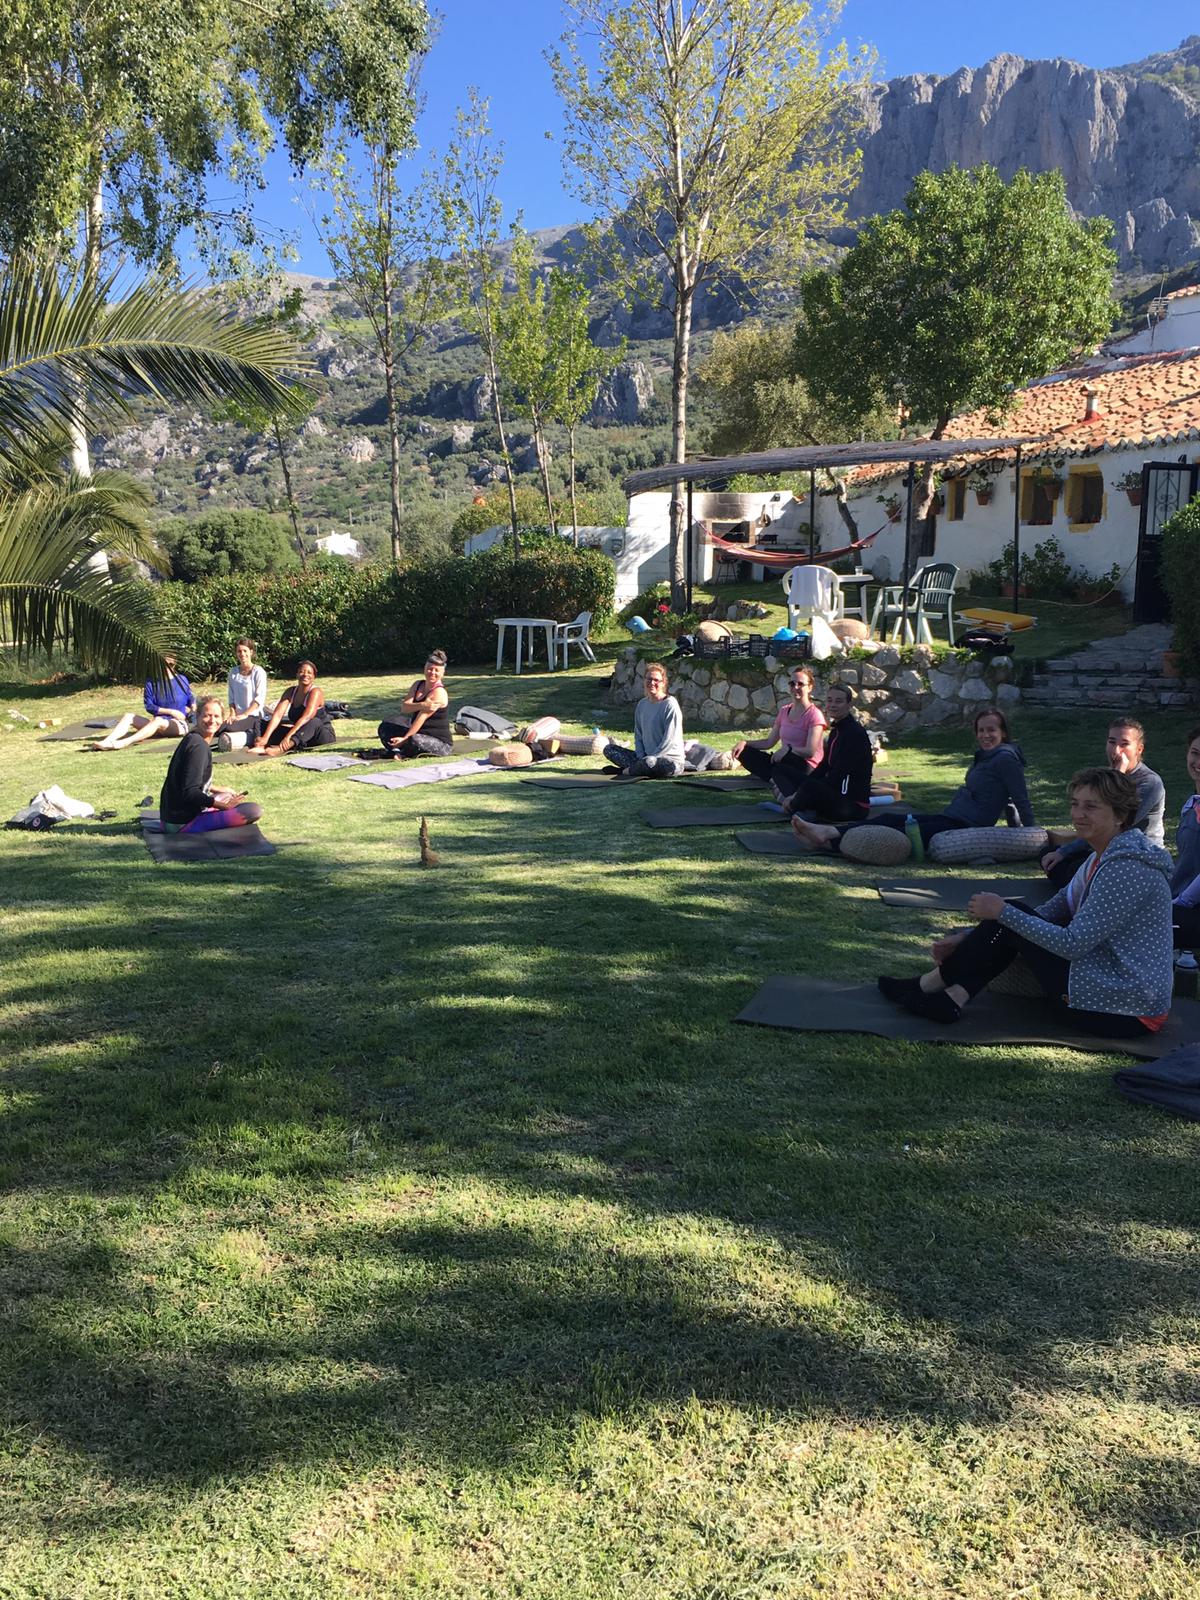 Yoga practice in the garden at Yin Yang Yoga retreat in the Malaga mountains in Spain with Jane Bakx Yoga (Copy)